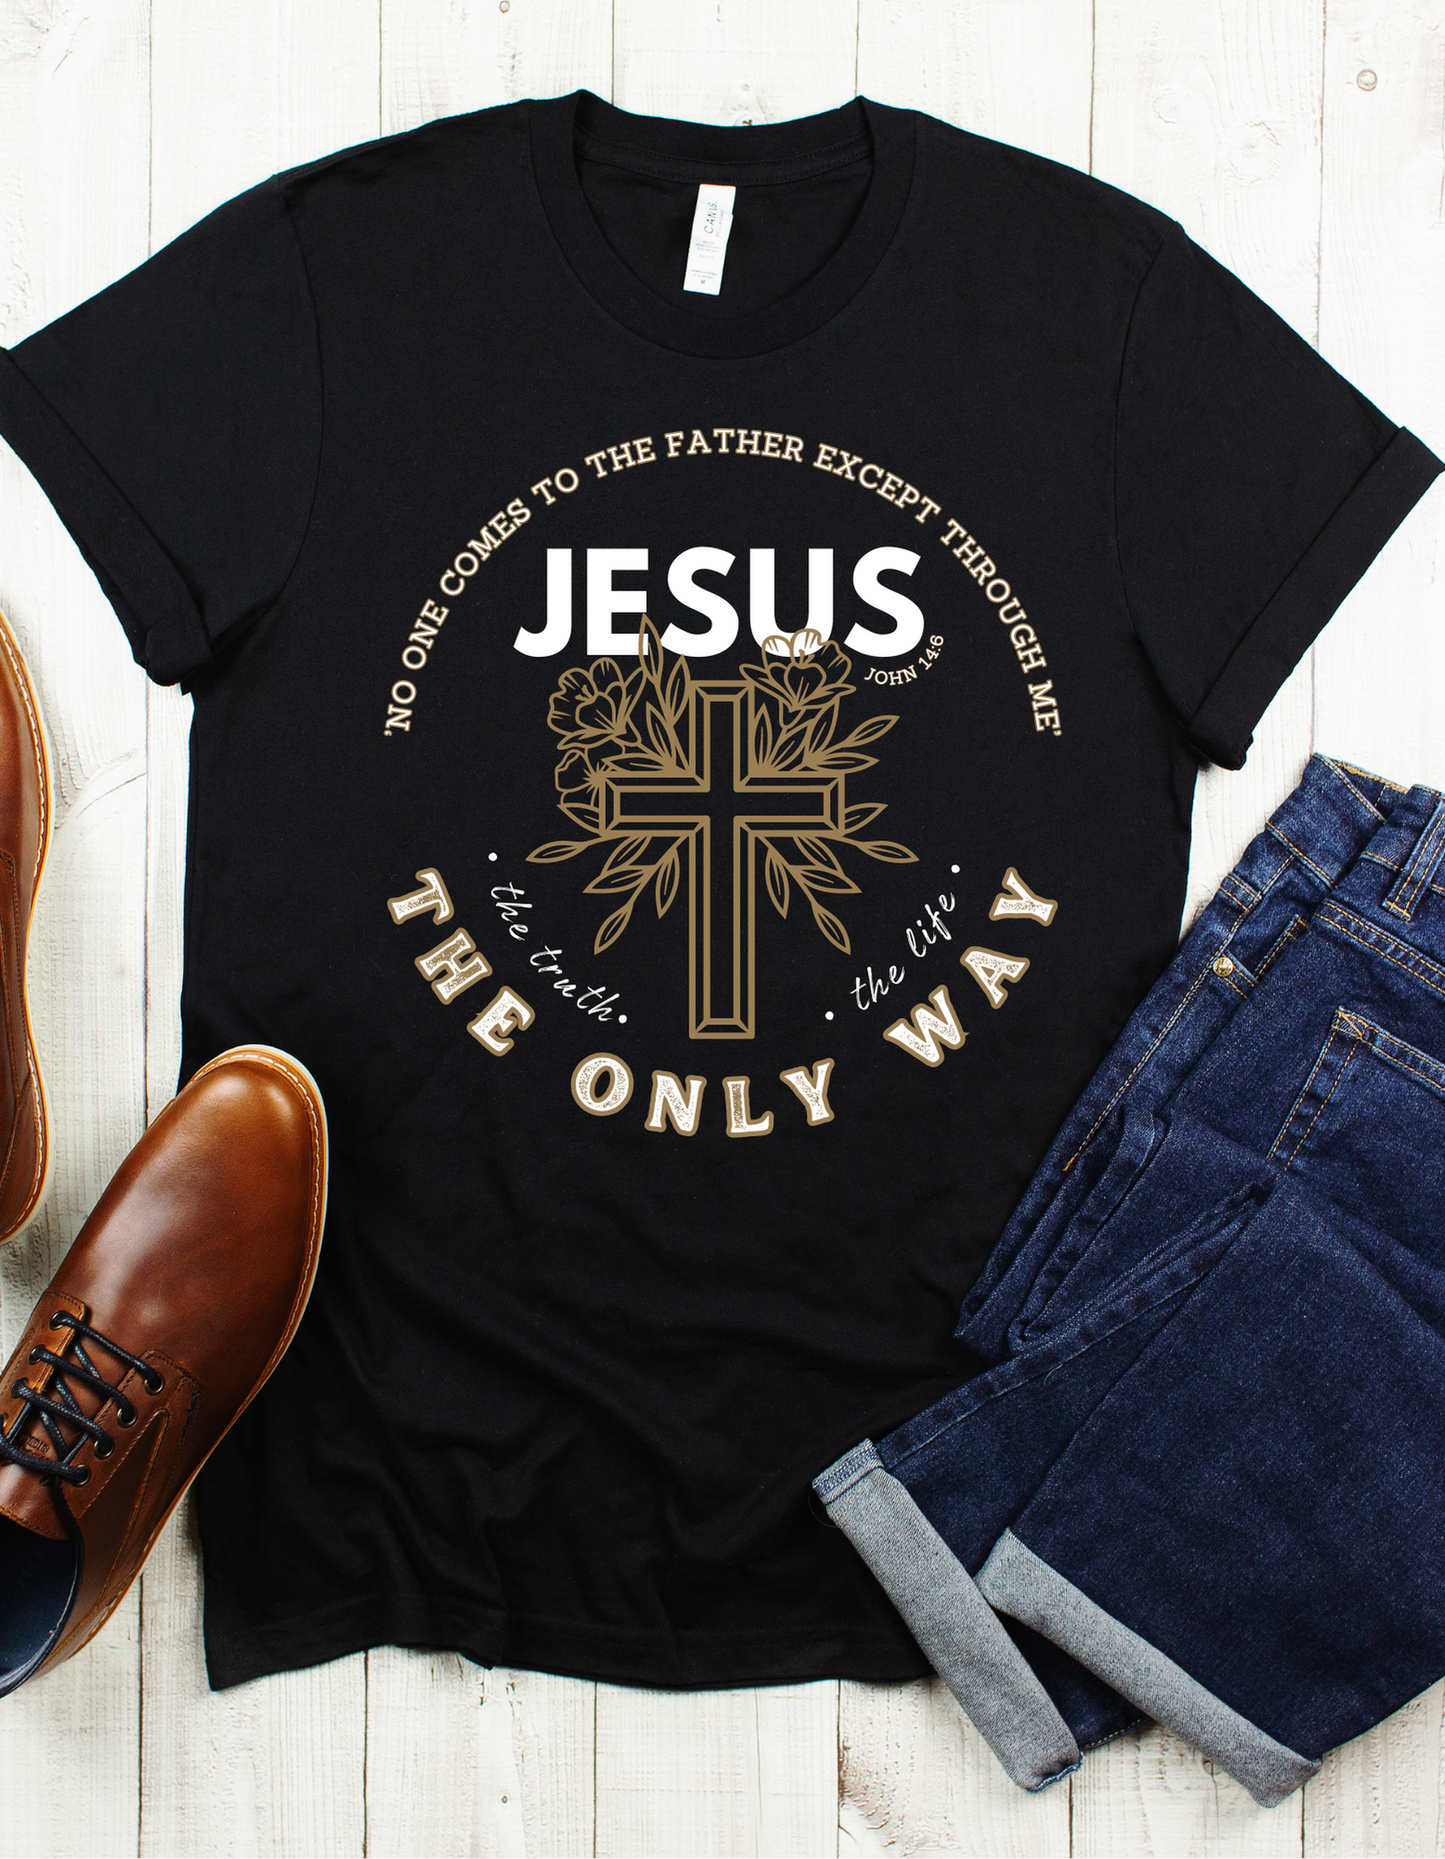 JESUS IS THE ONLY WAY UNISEX T-SHIRT